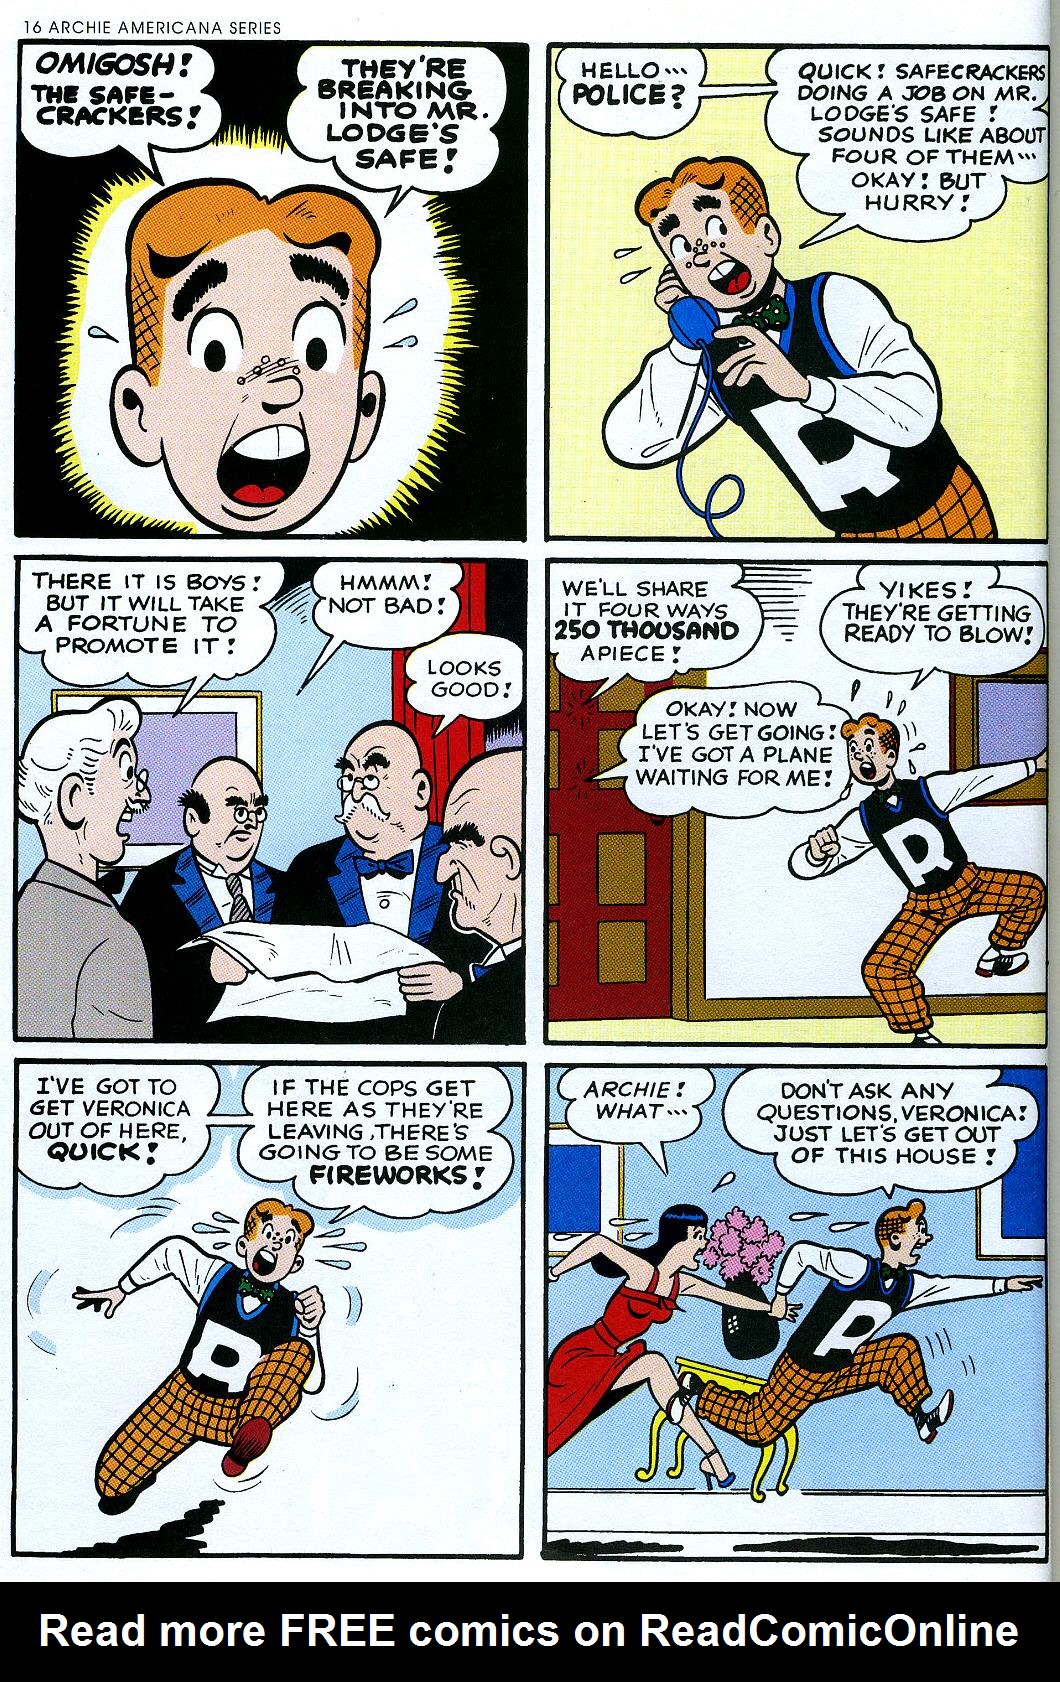 Read online Archie Americana Series comic -  Issue # TPB 2 - 18